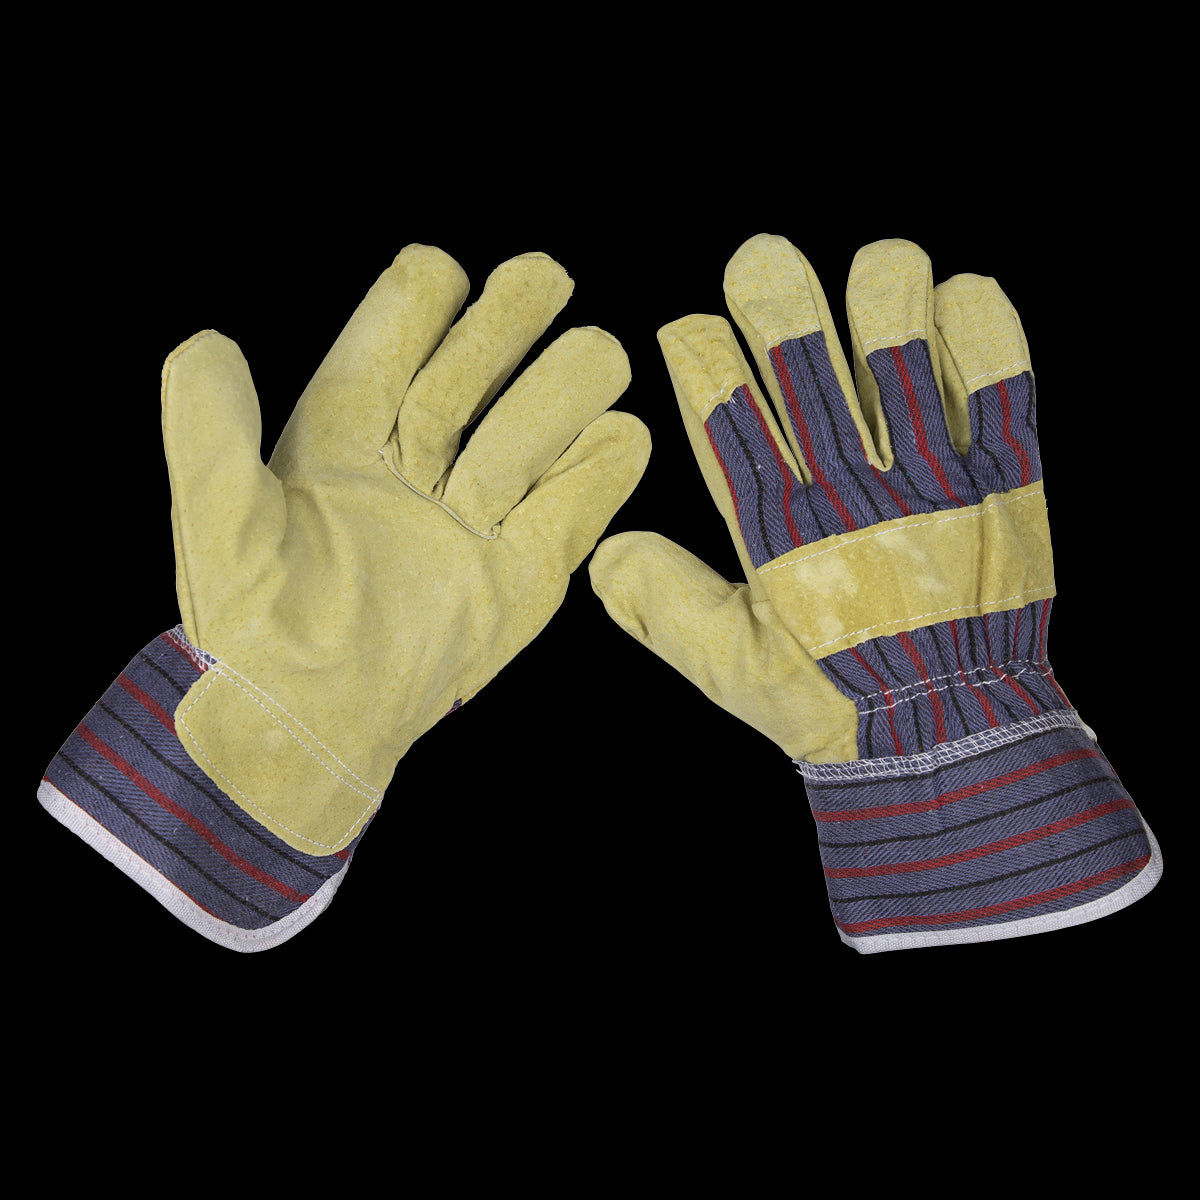 Worksafe by Sealey Rigger's Gloves - Pack of 6 Pairs